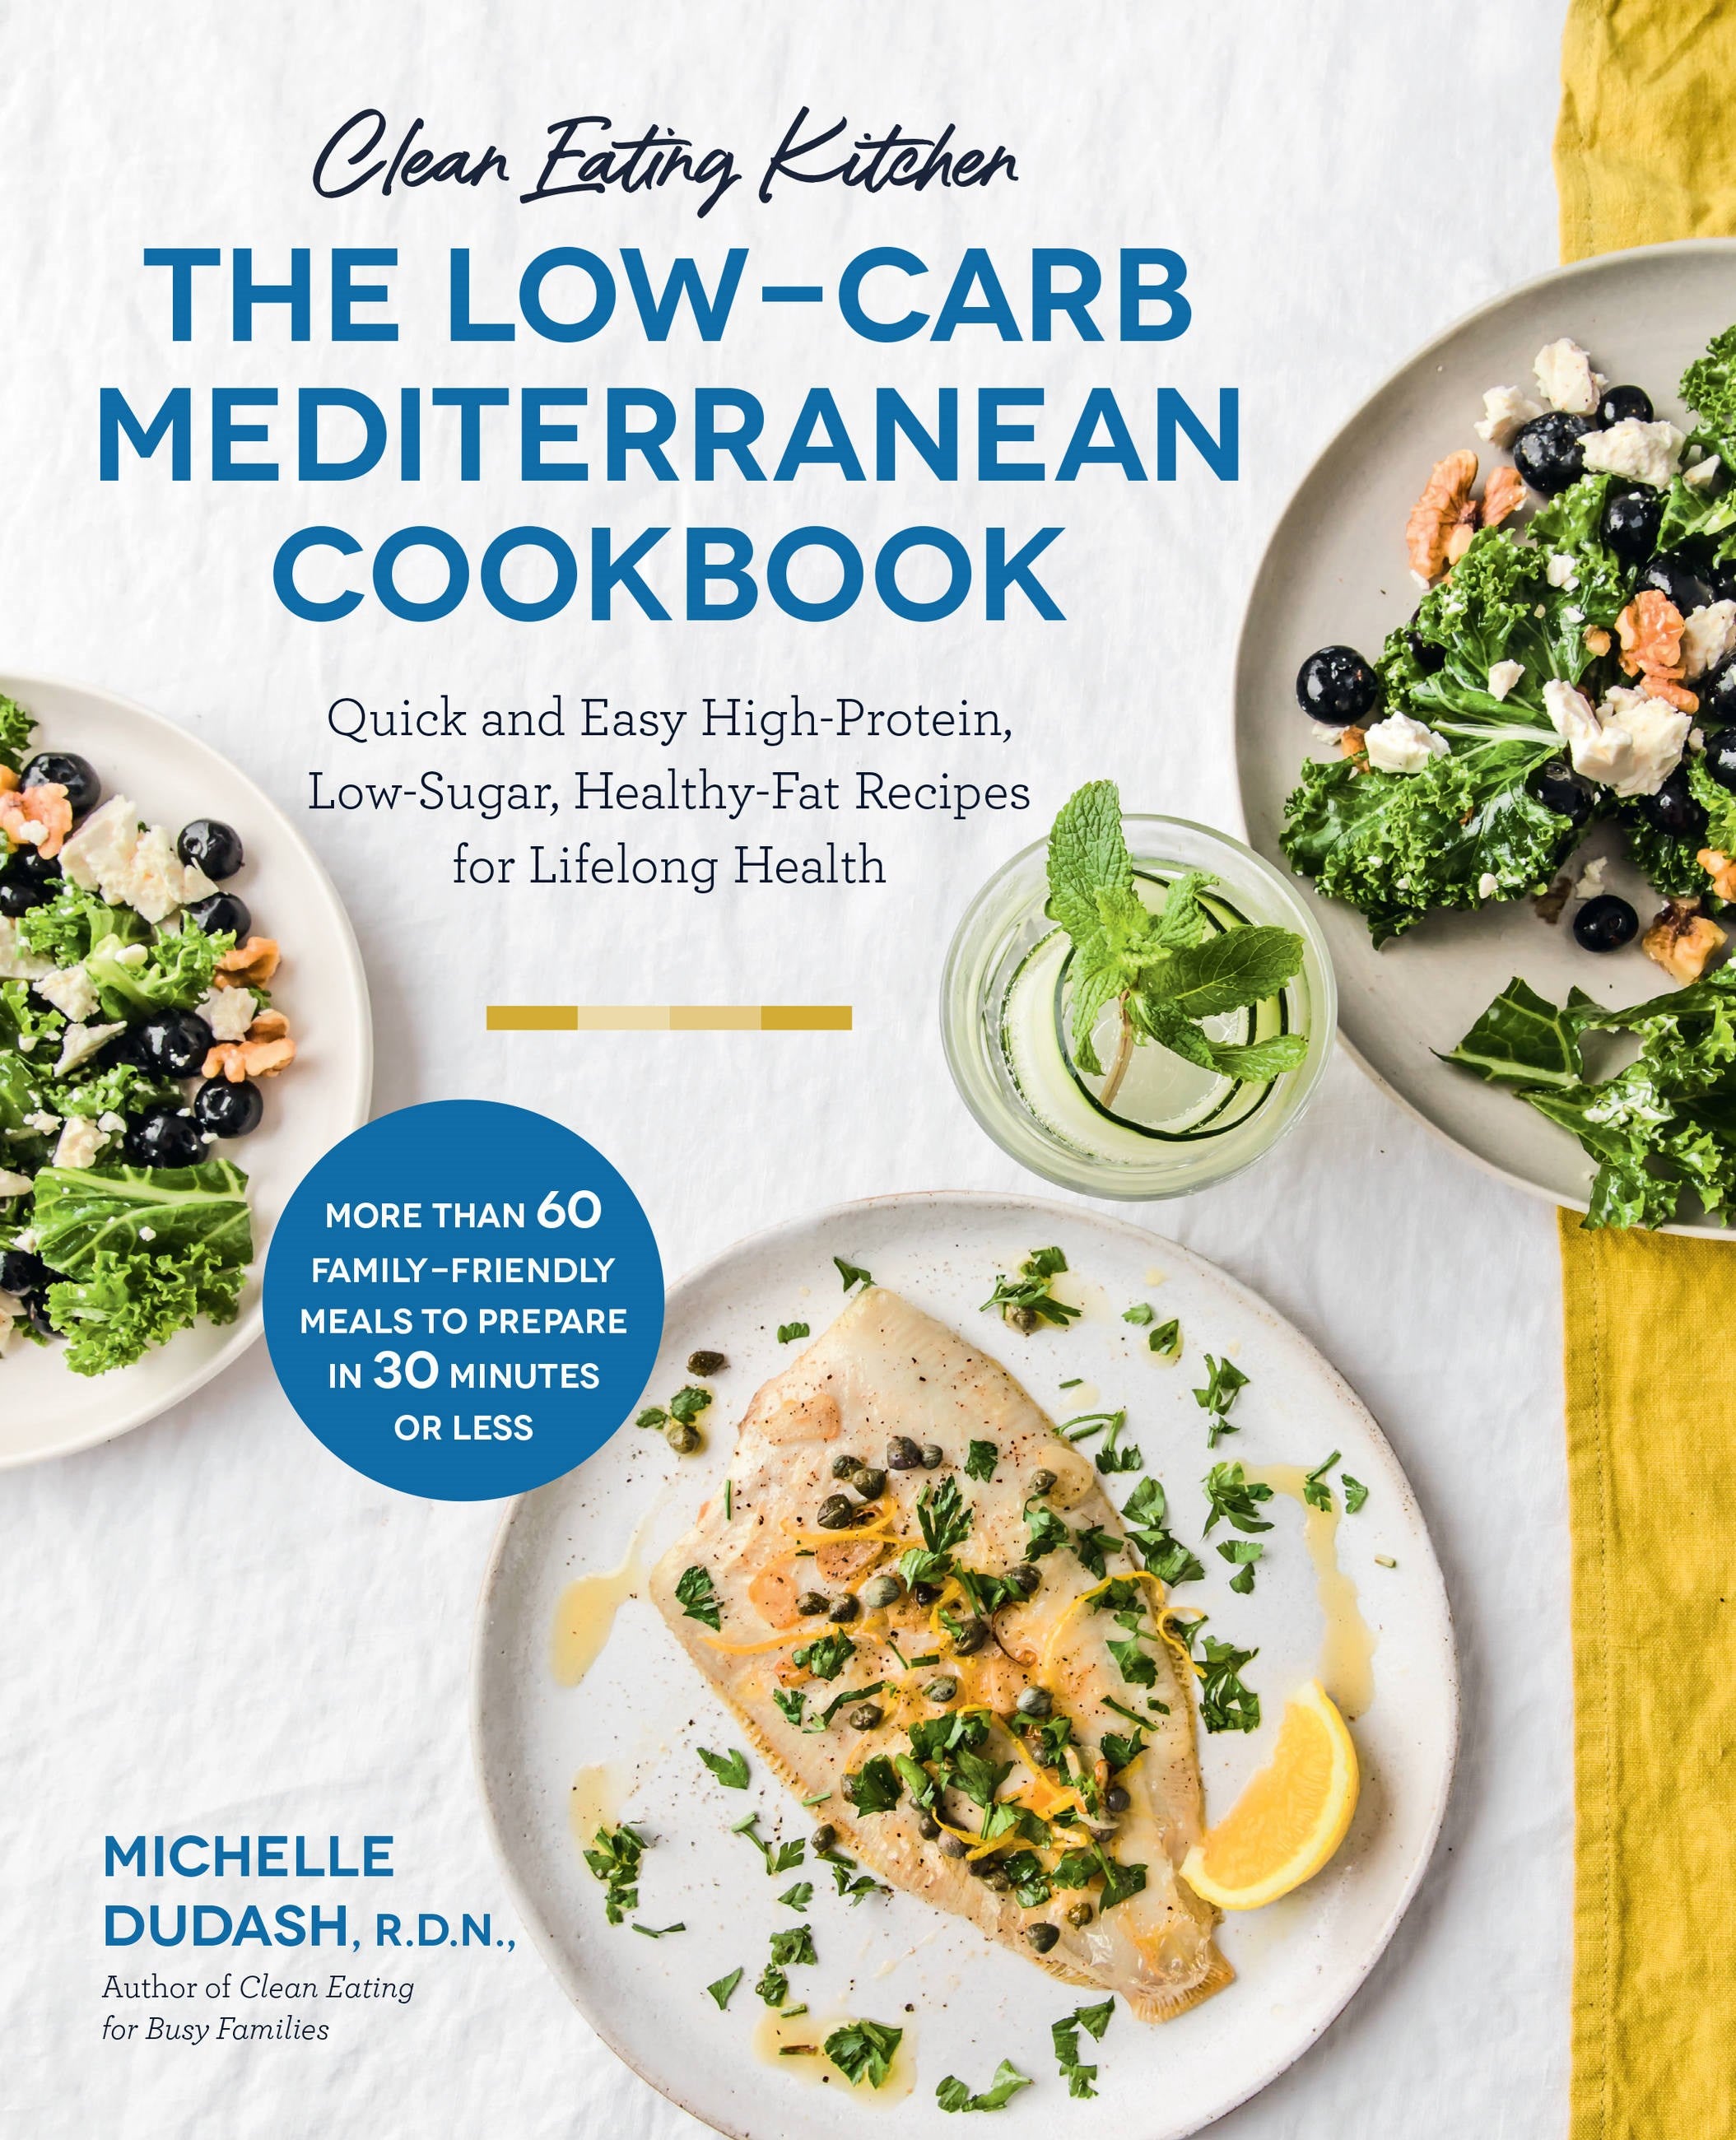 Clean Eating Kitchen: The Low-Carb Mediterranean Cookbook : Quick and Easy High-Protein, Low-Sugar, Healthy-Fat Recipes for Lifelong Health-More Than 60 Family Friendly Meals to Prepare in 30 Minutes or Less